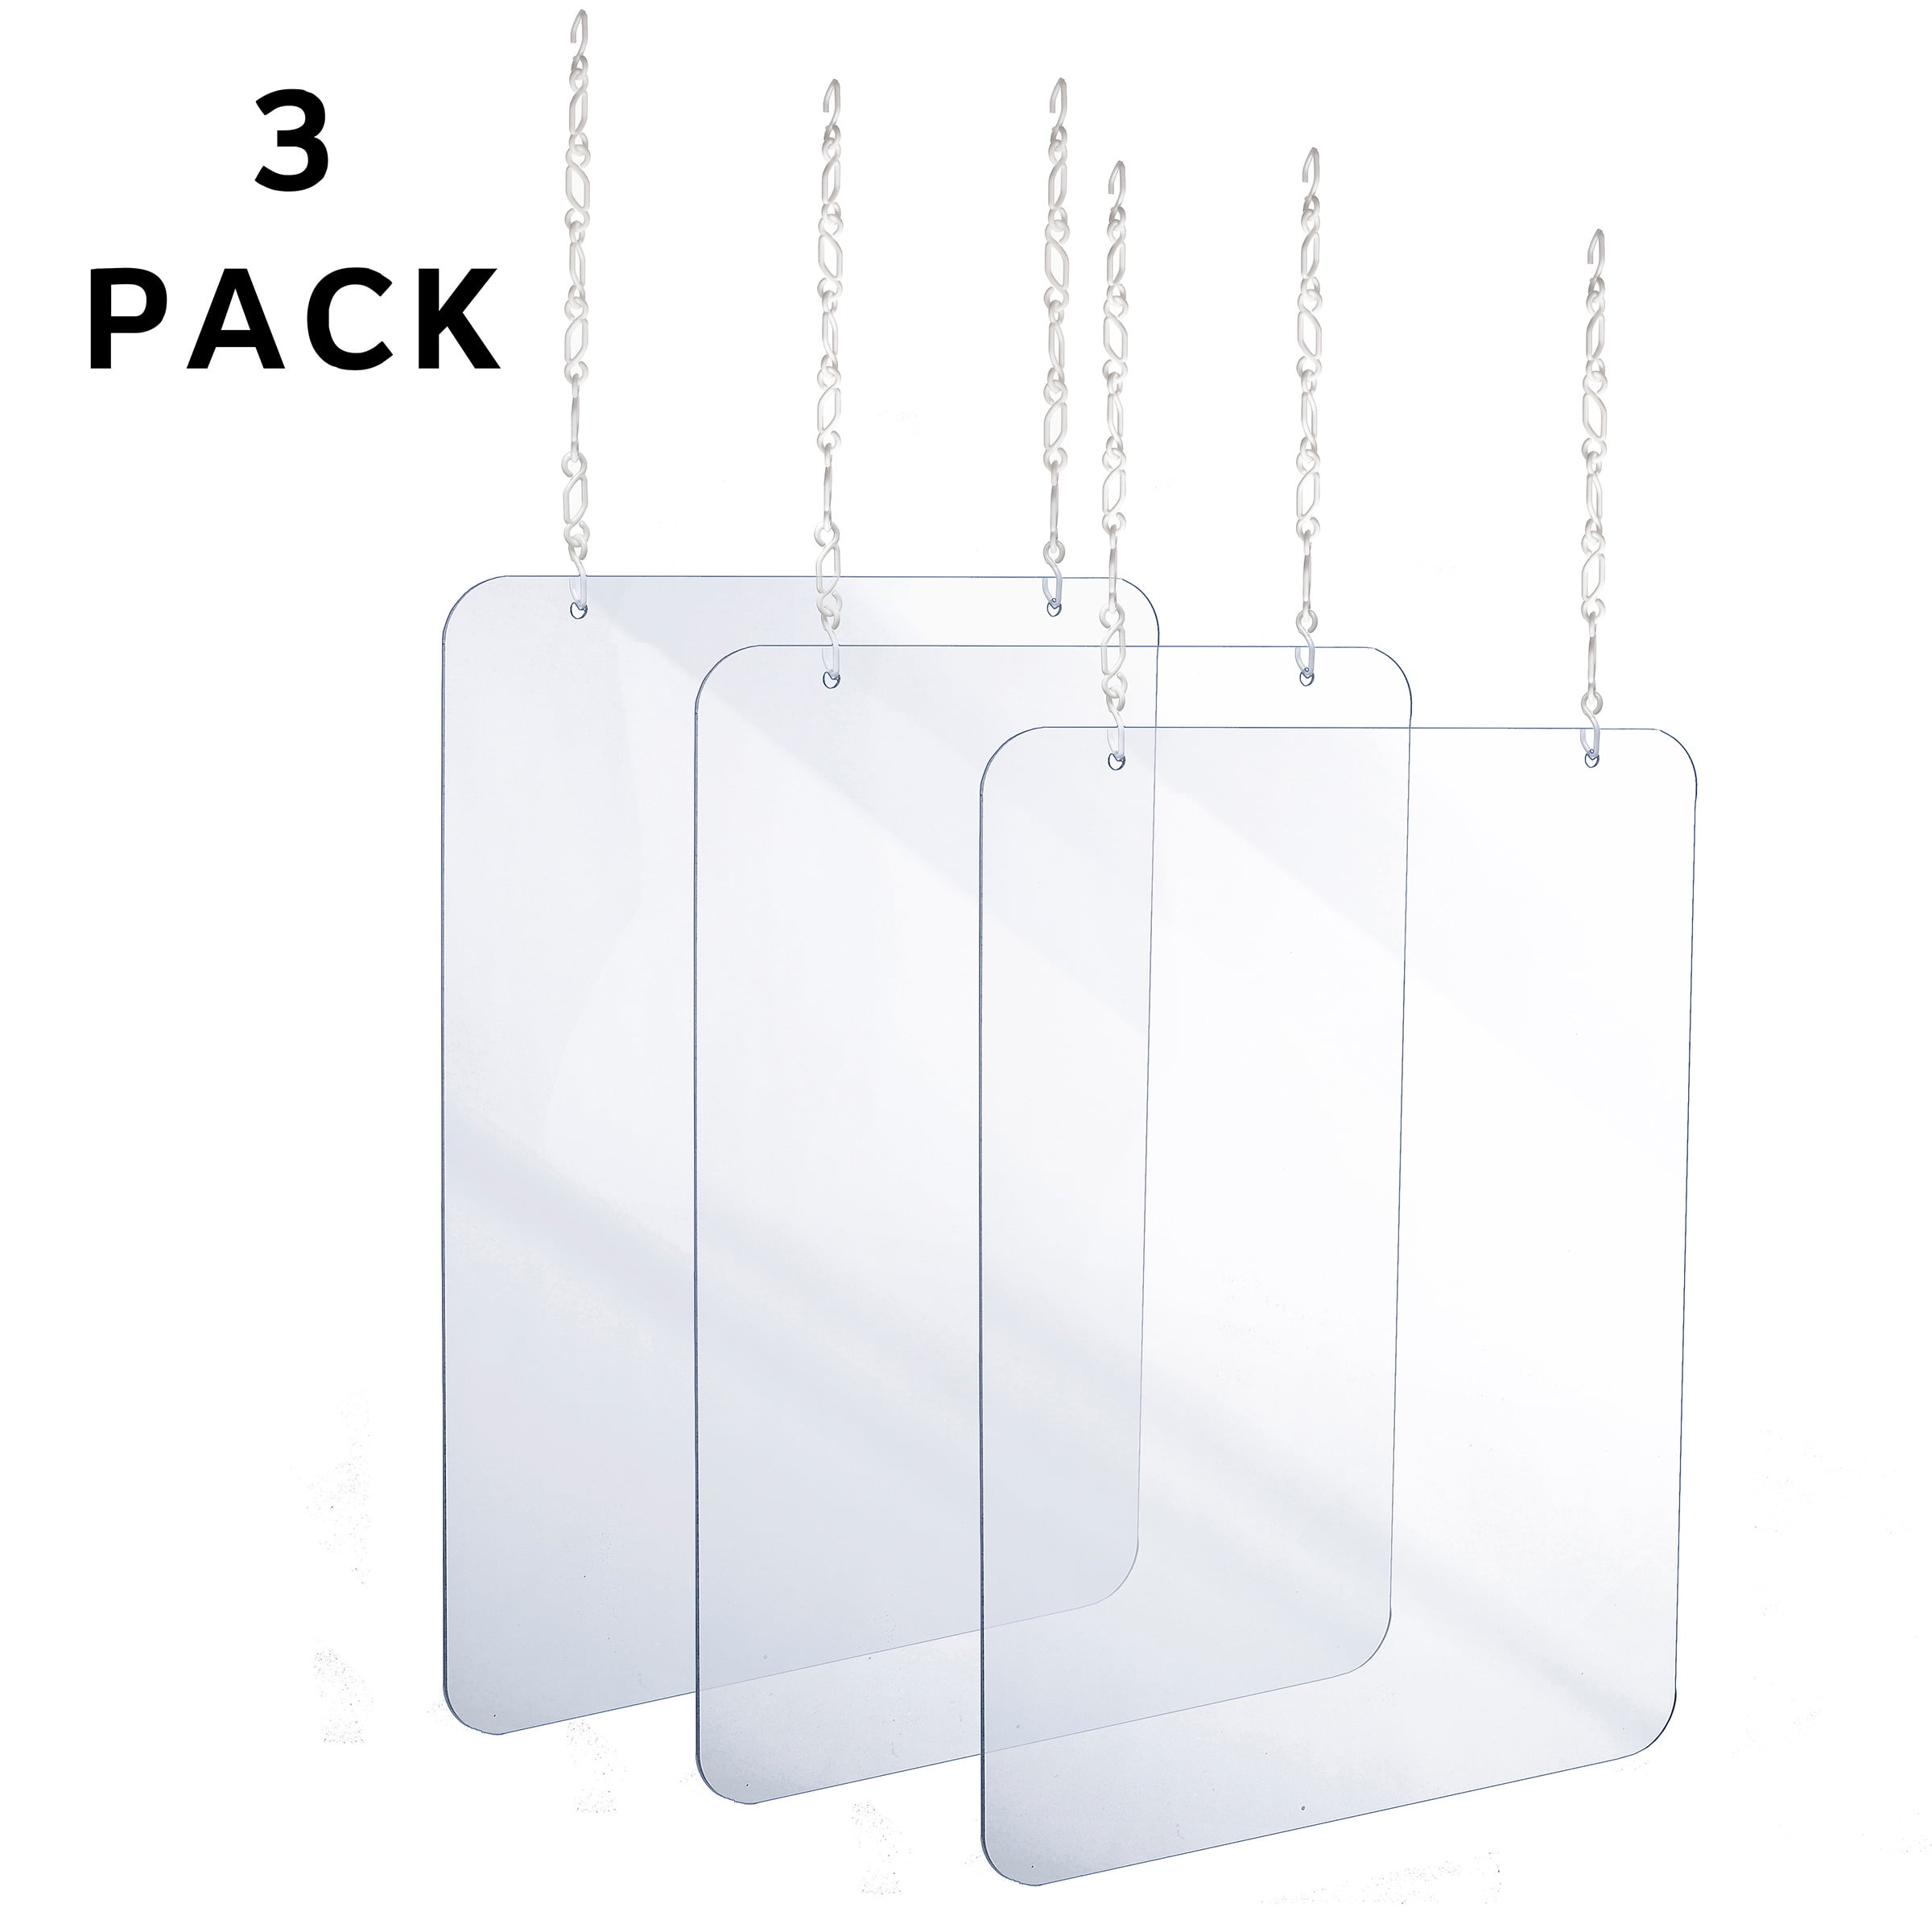 SHOP COUNTER SCREEN CLEAR PLASTIC HANGING SCREEN SNEEZE GUARD VIRUS PROTECTION 